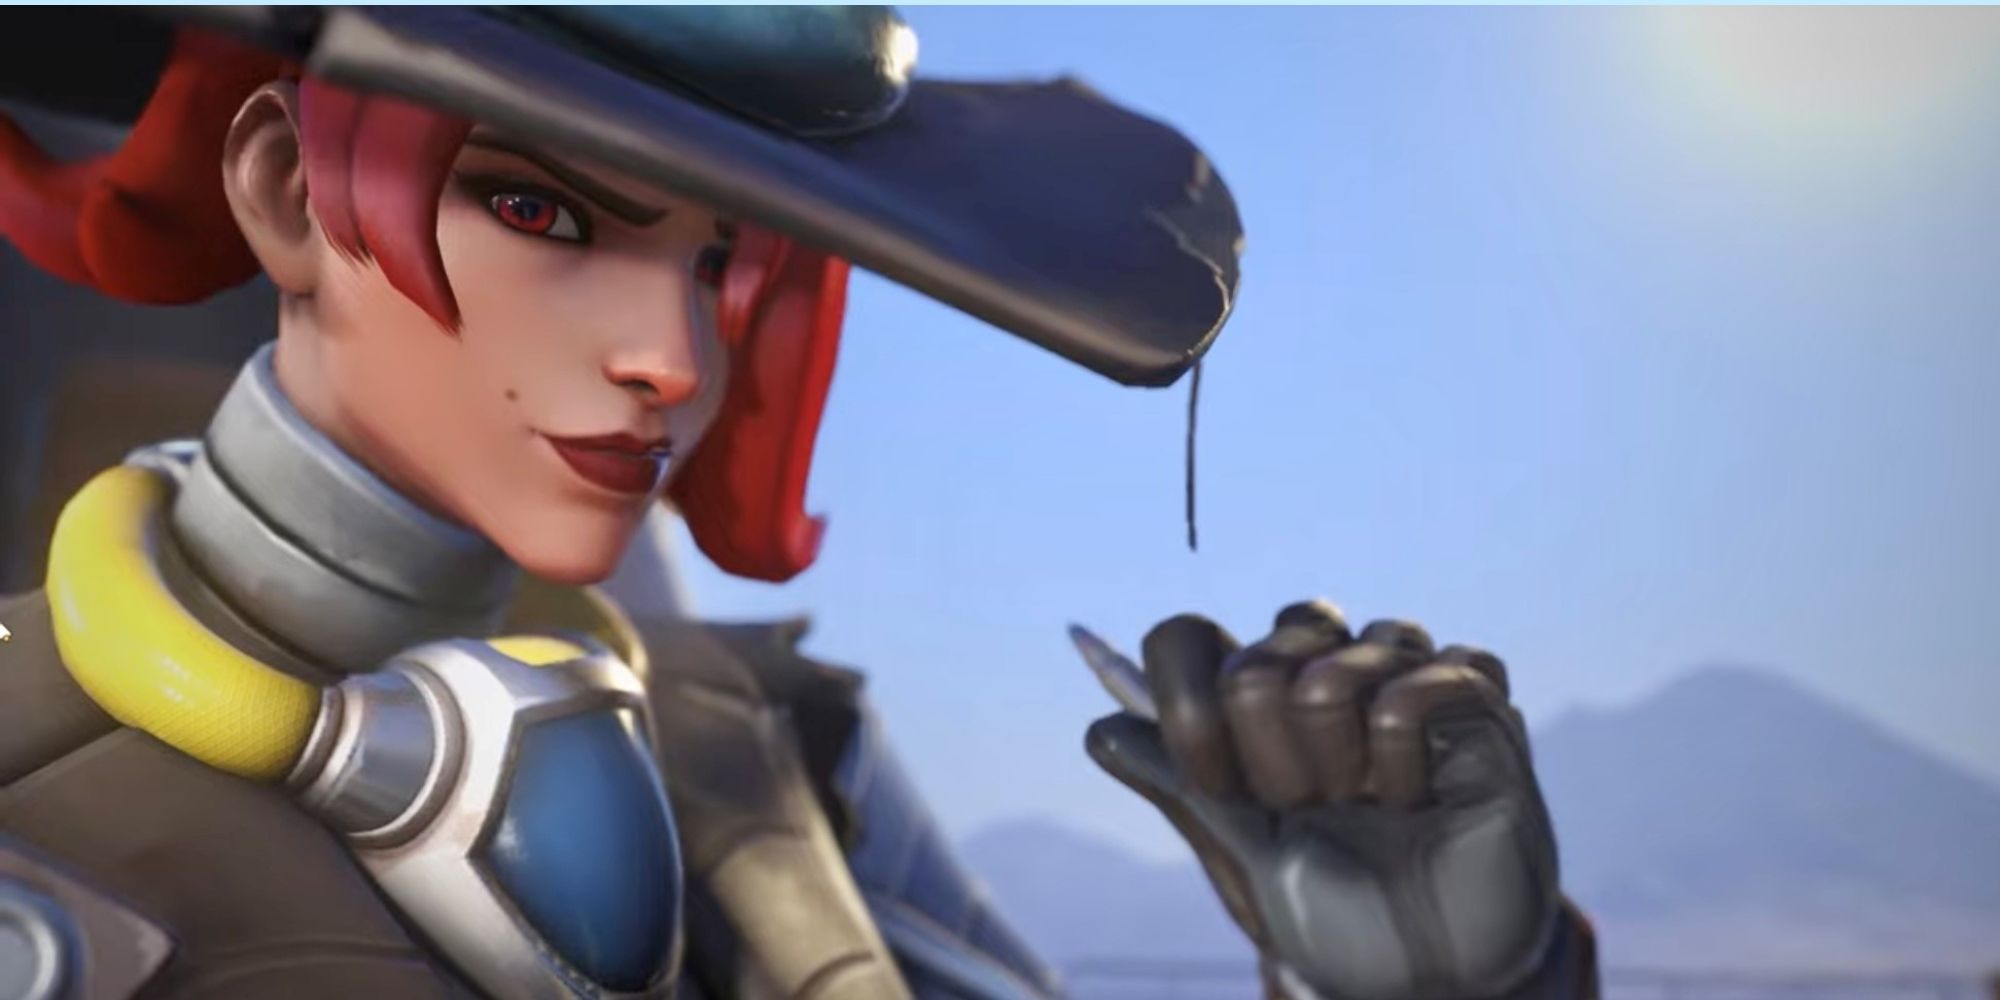 Overwatch 2 Ashe Intergalactic Smuggler Skin battle pass season 4 legendary skin, with Ashe in a cowboyish hat and gloves holding a bullet